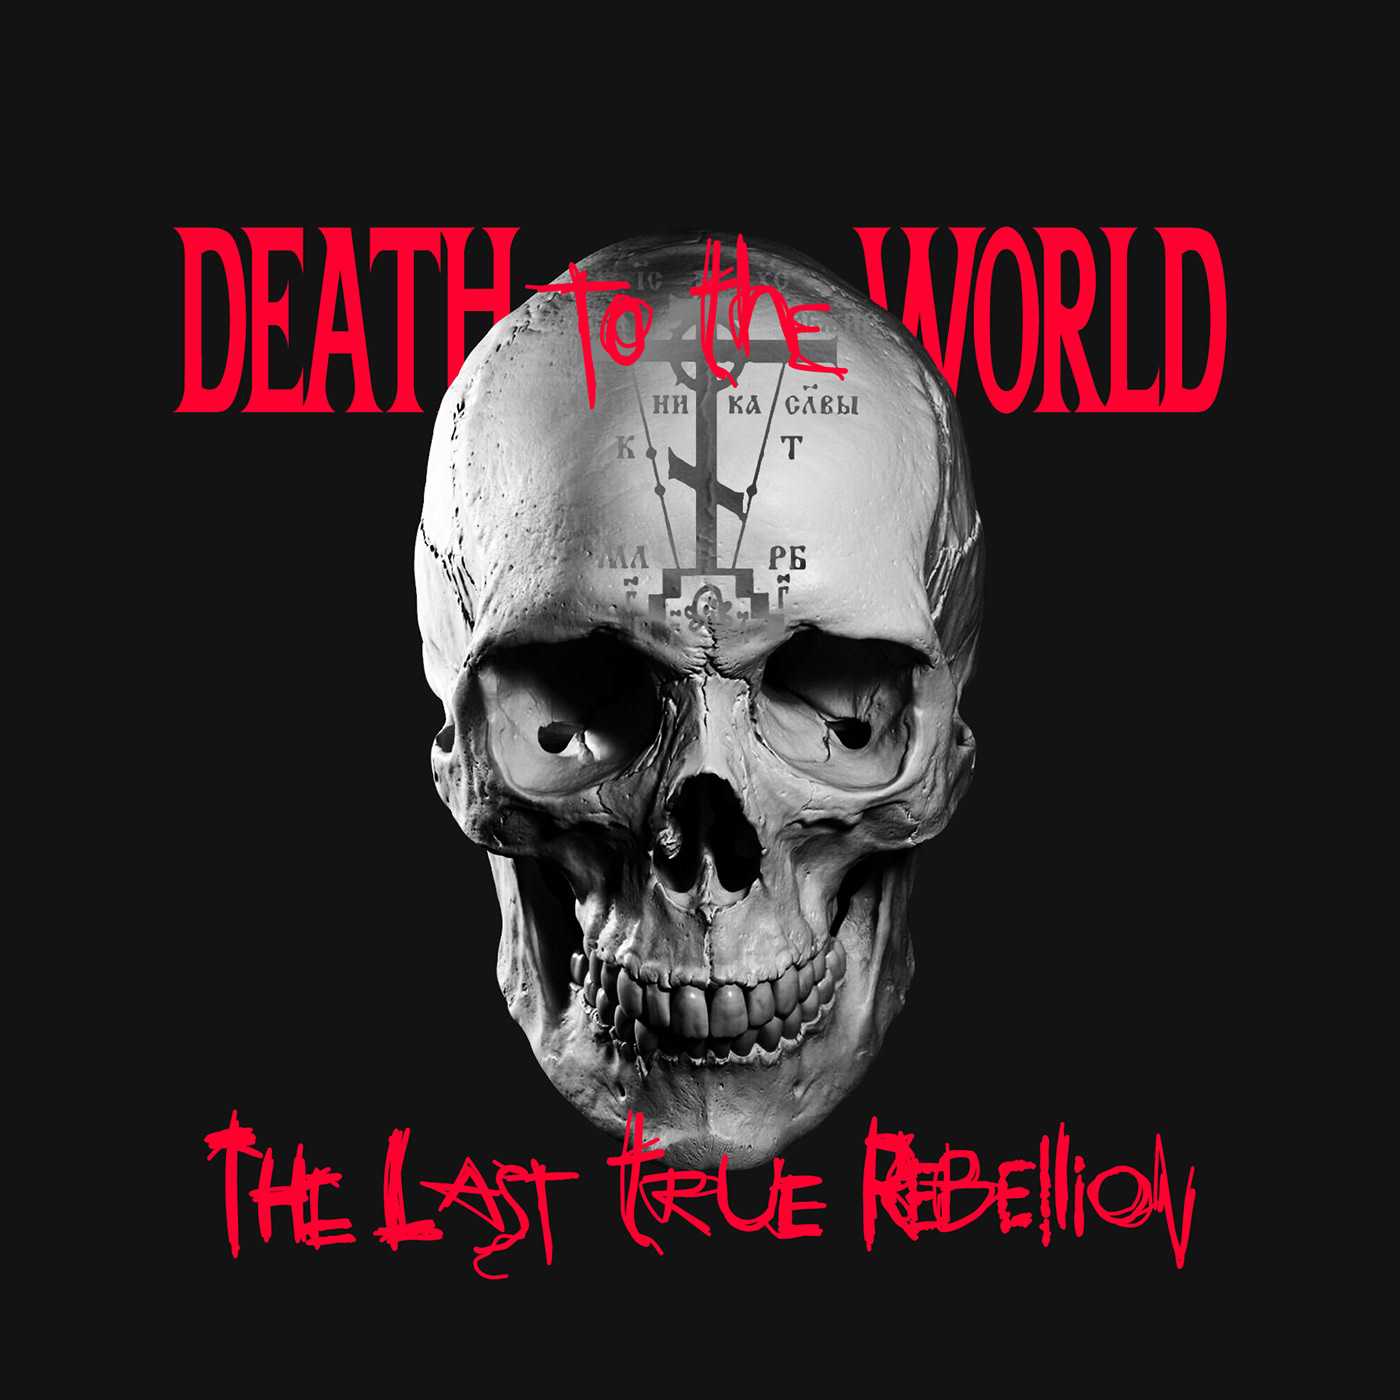 "DEATH TO THE WORLD - THE LAST TRUE REBELLION" fanart by Cícero Rodrigues on PSCS6 for personal use